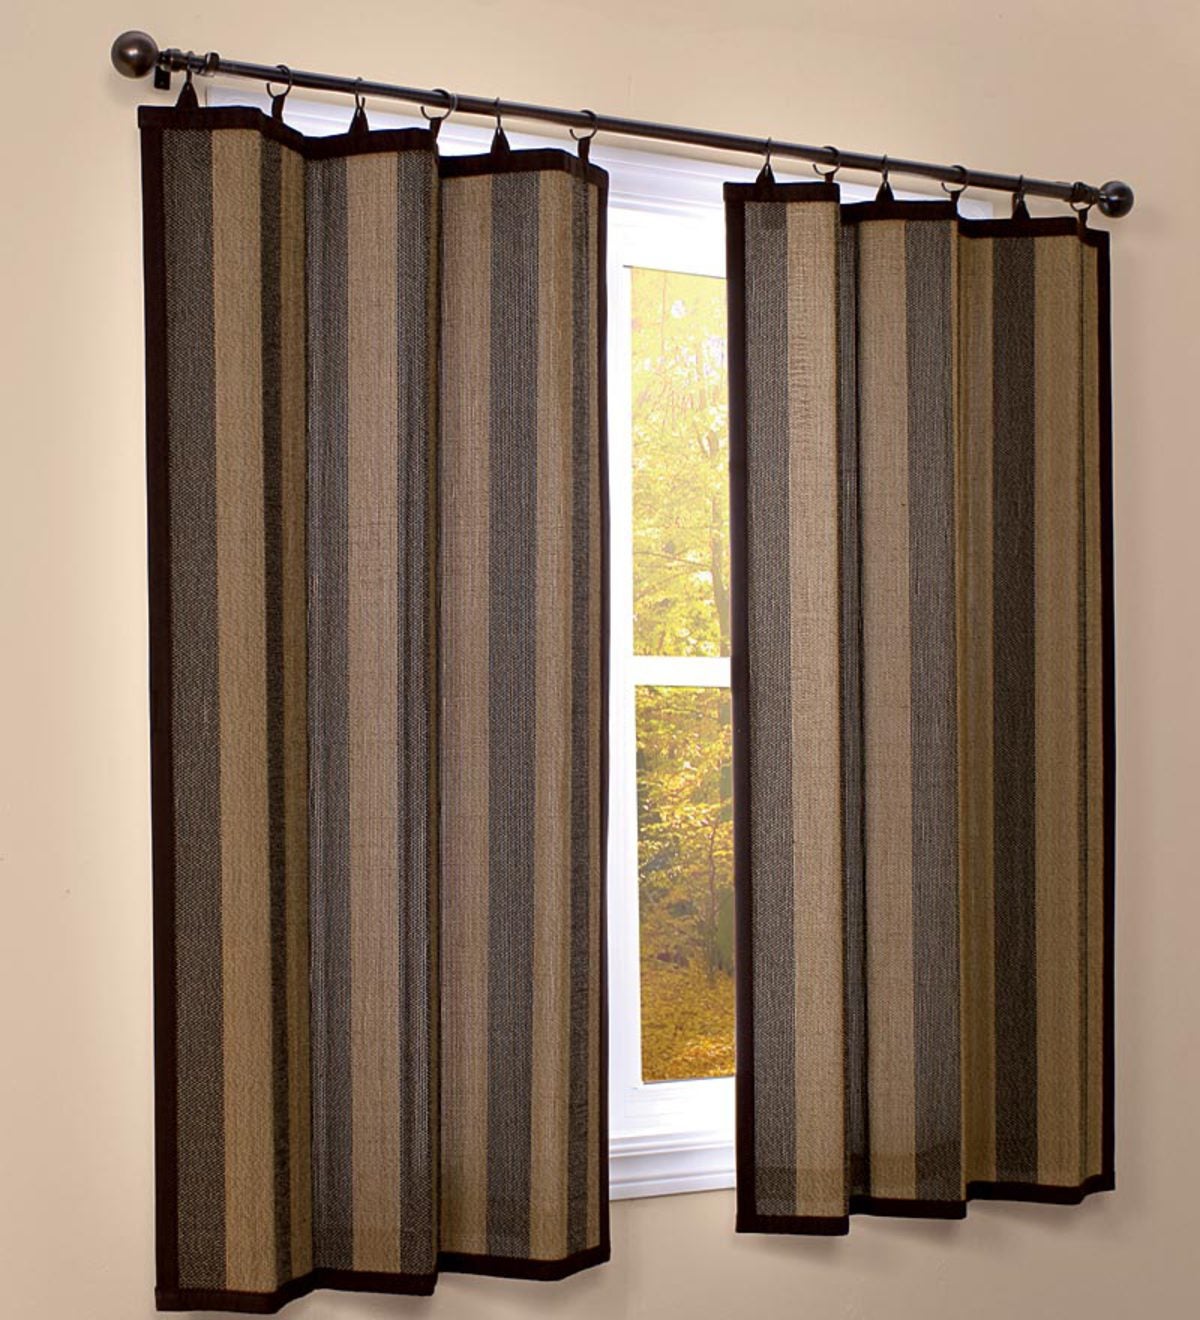 Easy Glide Bamboo Valance